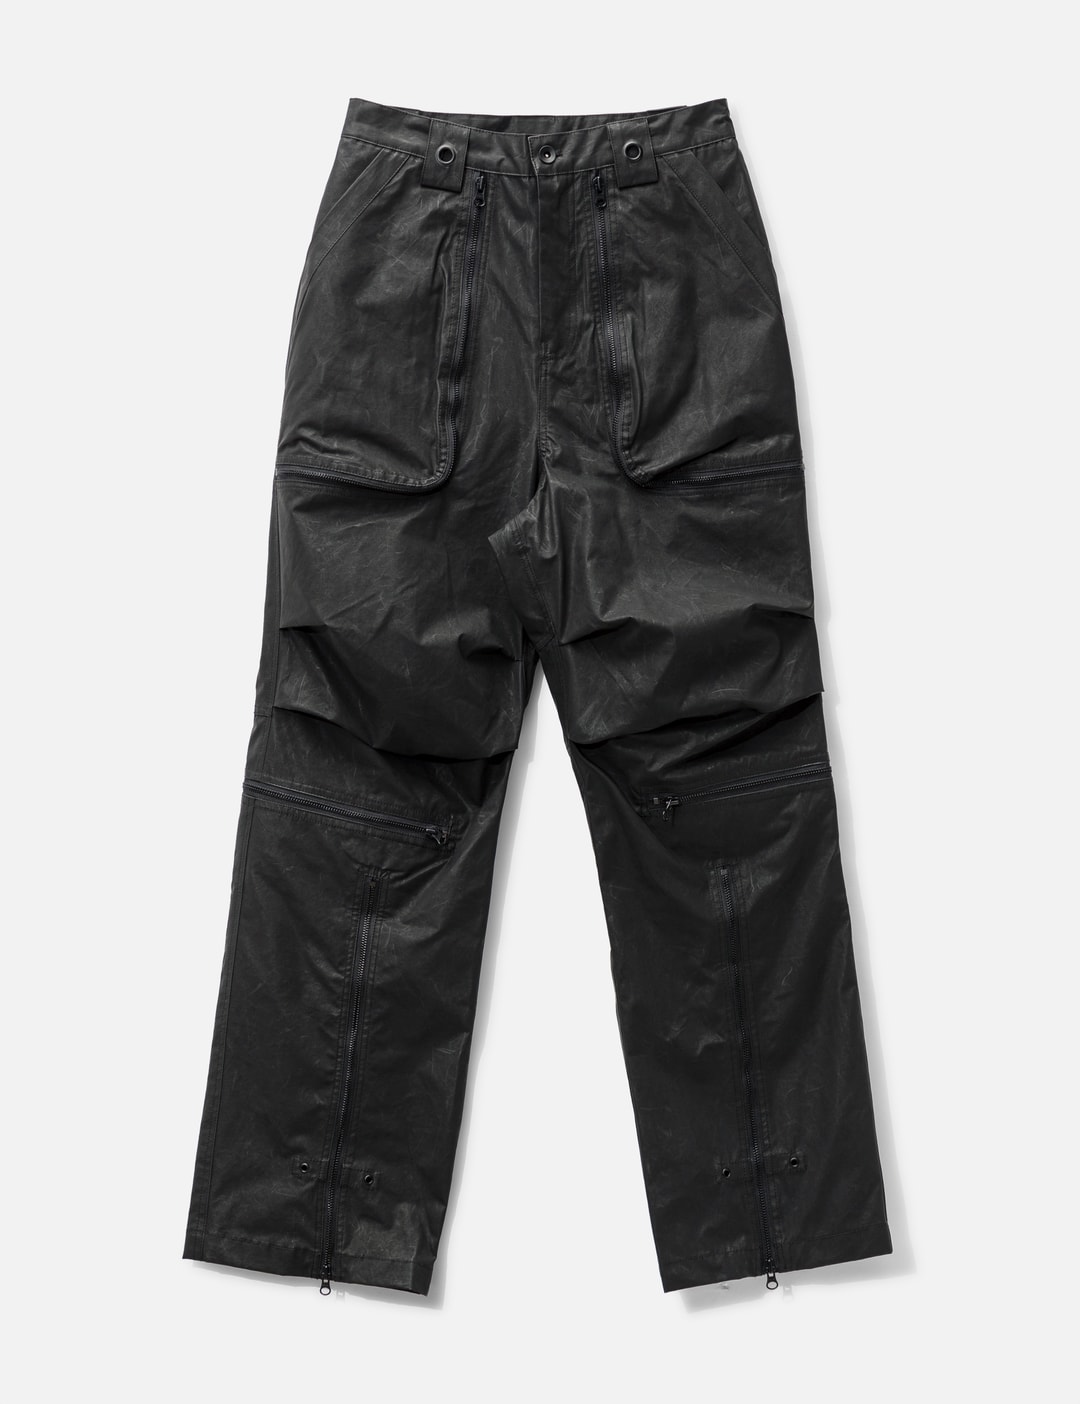 GRAILZ - AFV Cargo Pants | HBX - Globally Curated Fashion and Lifestyle ...